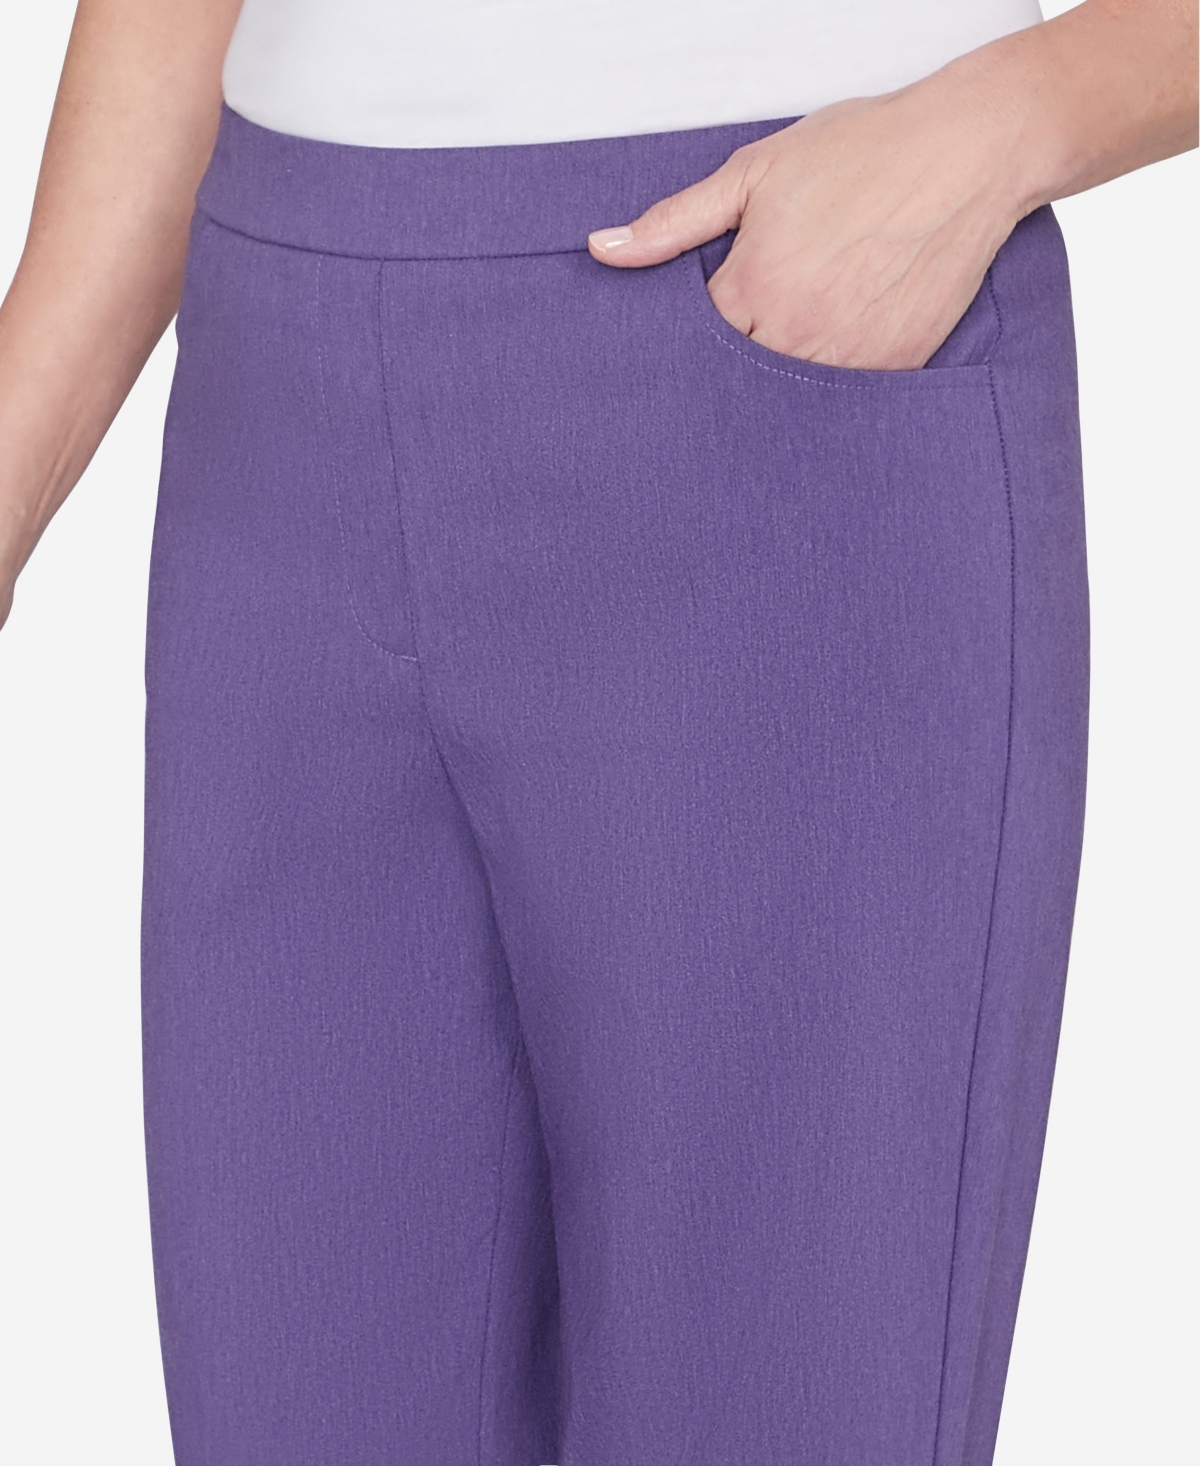 Shop Alfred Dunner Charm School Women's Classic Charmed Average Length Pant In Iris